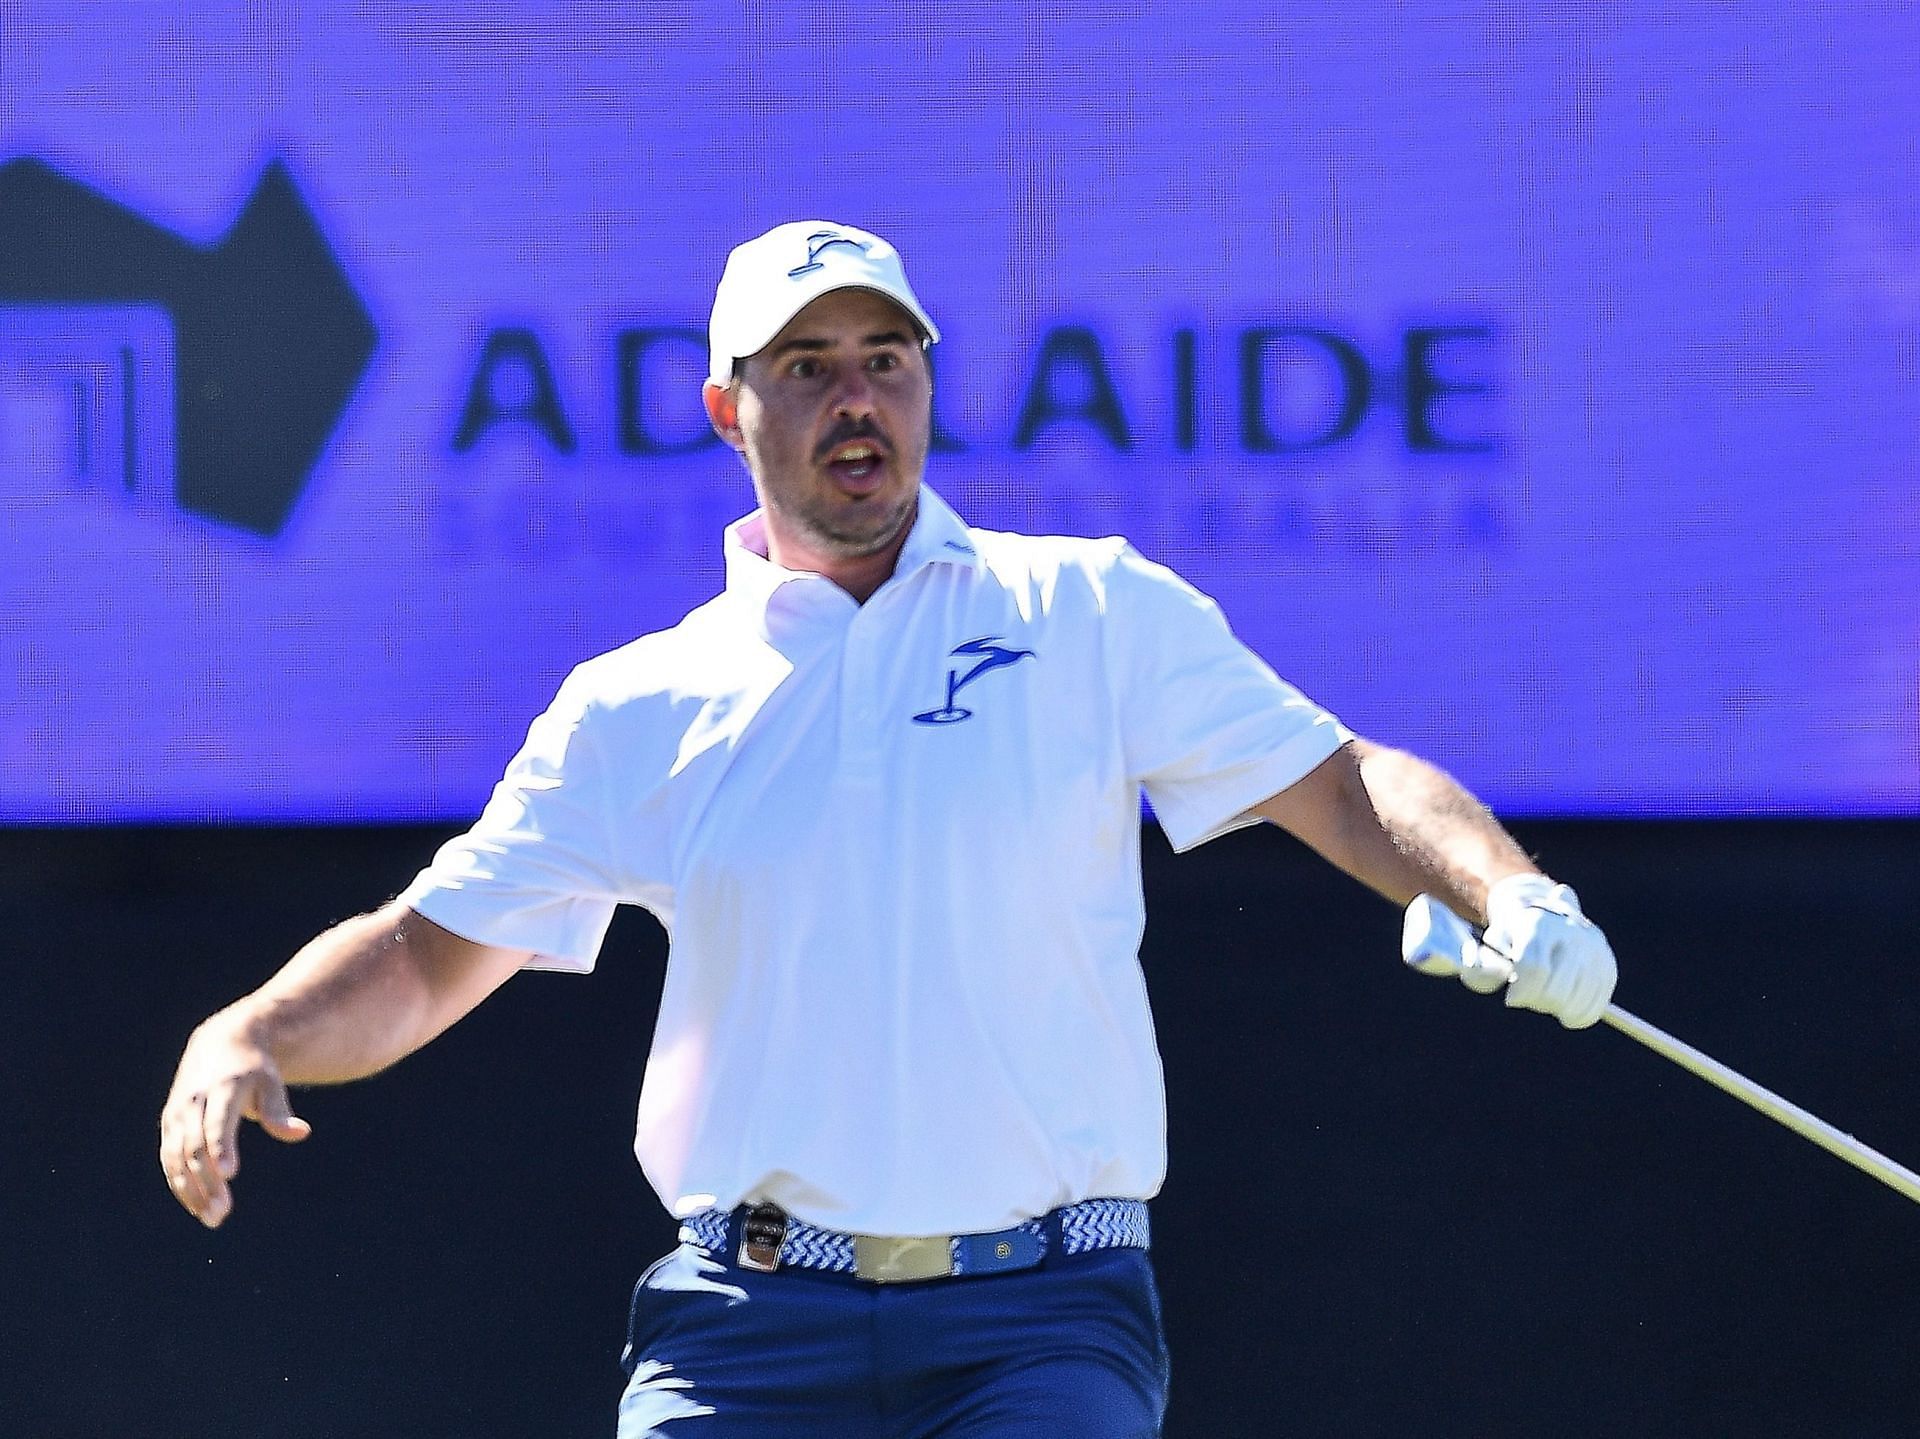 Chase Koepka of the Smash reacts to hitting a hole in one on the 12th during day three of Liv Golf Adelaide (Image via Getty)